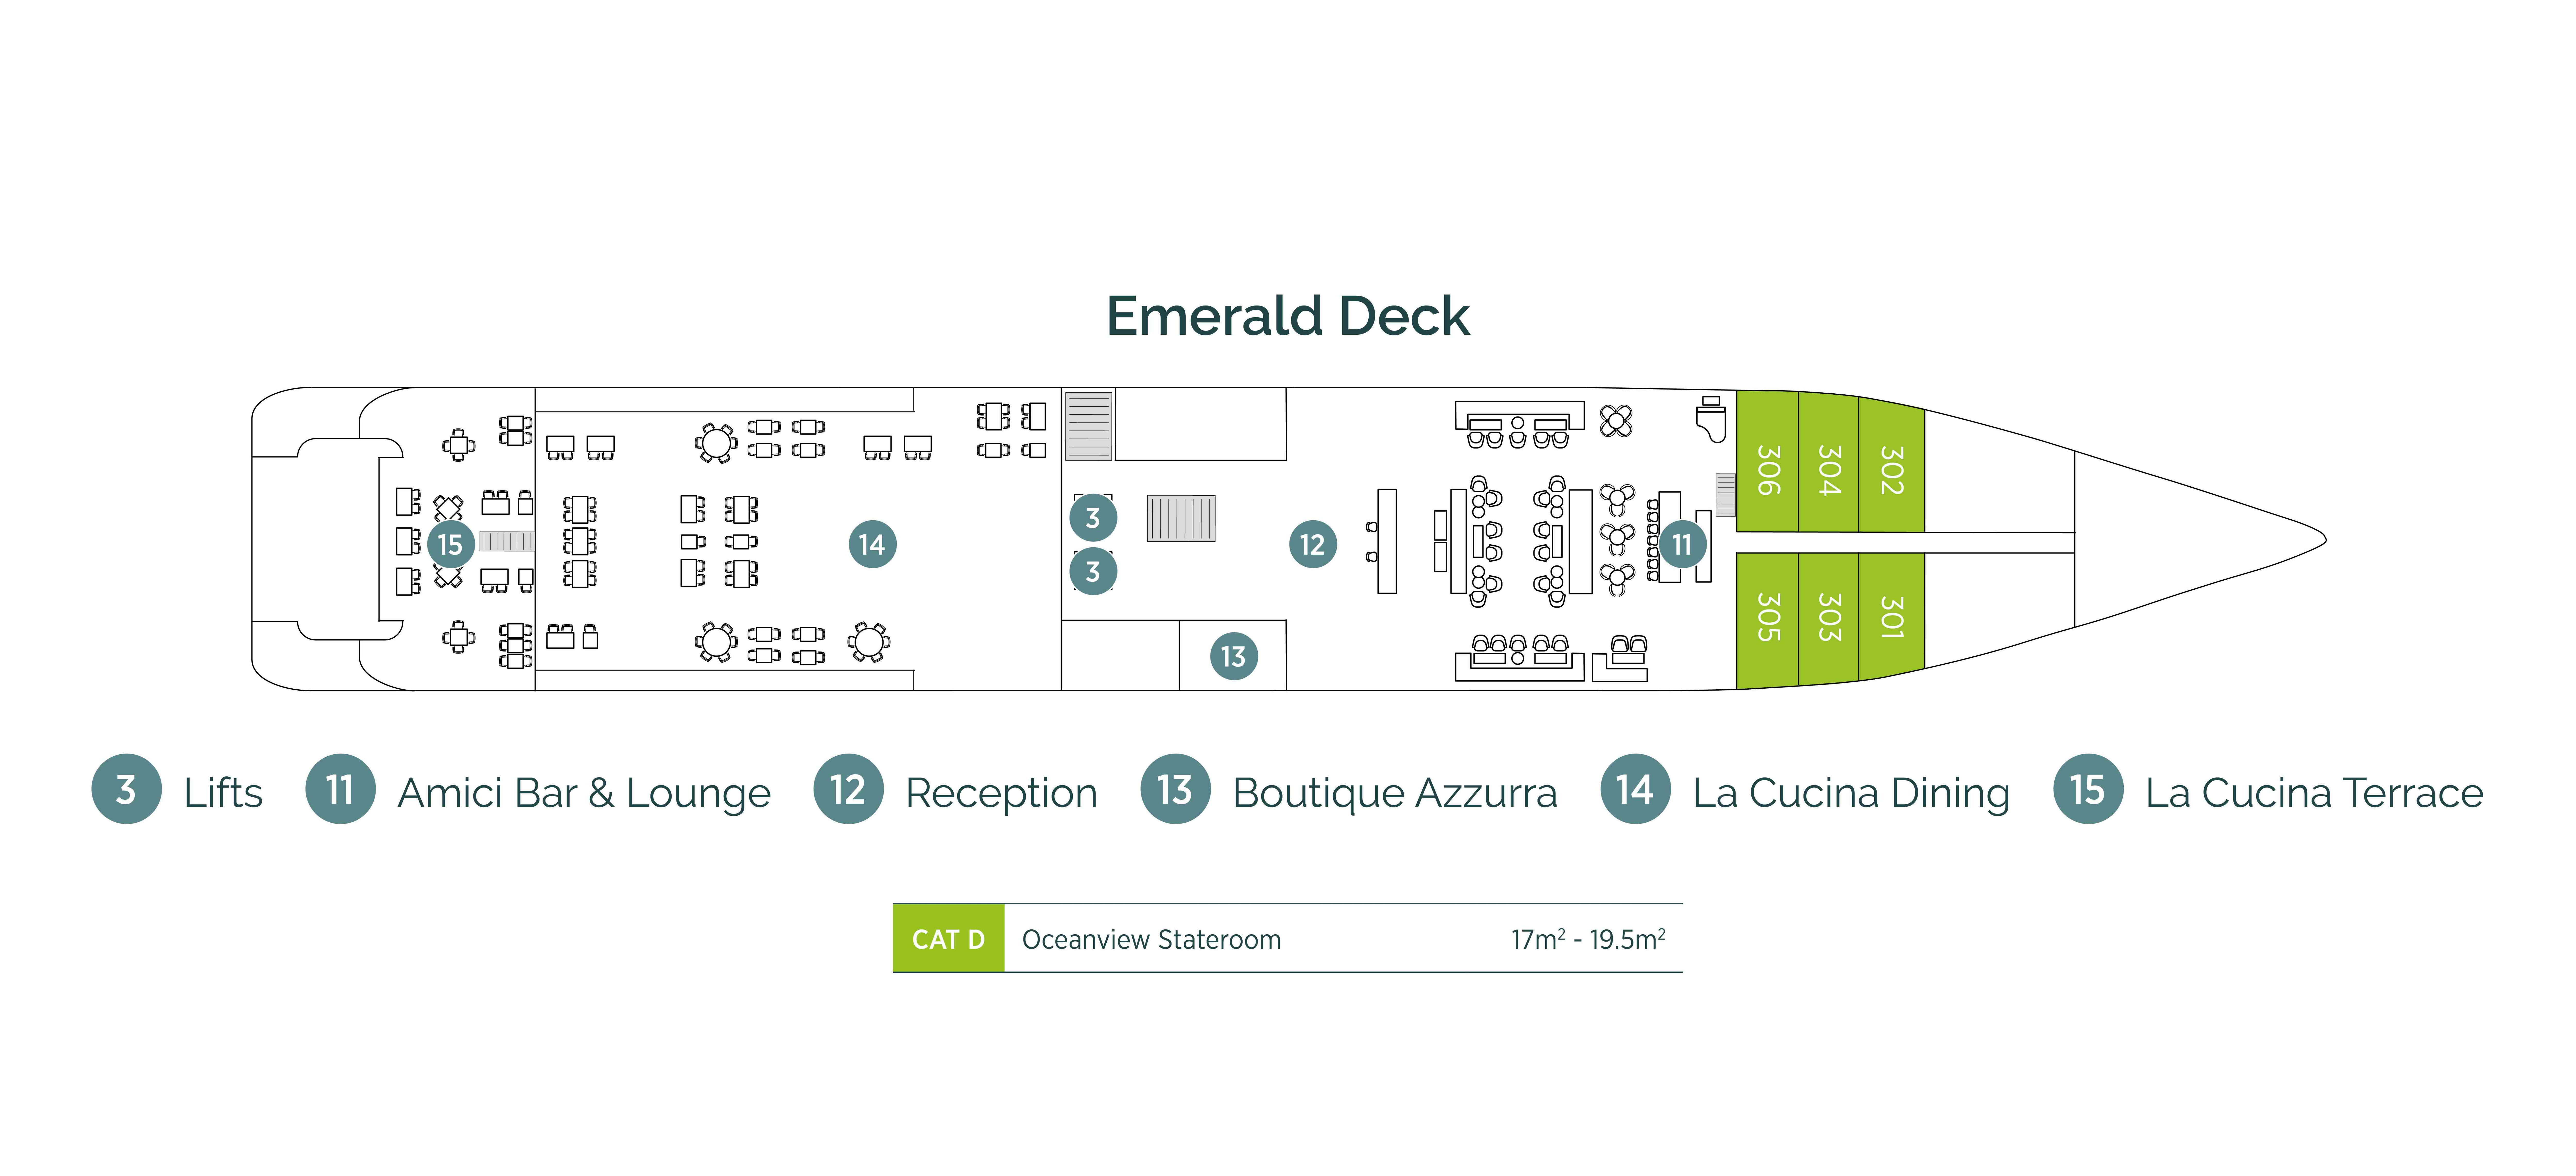 Diagram of ship layout for the Emerald Deck of an Emerald Cruises luxury yacht